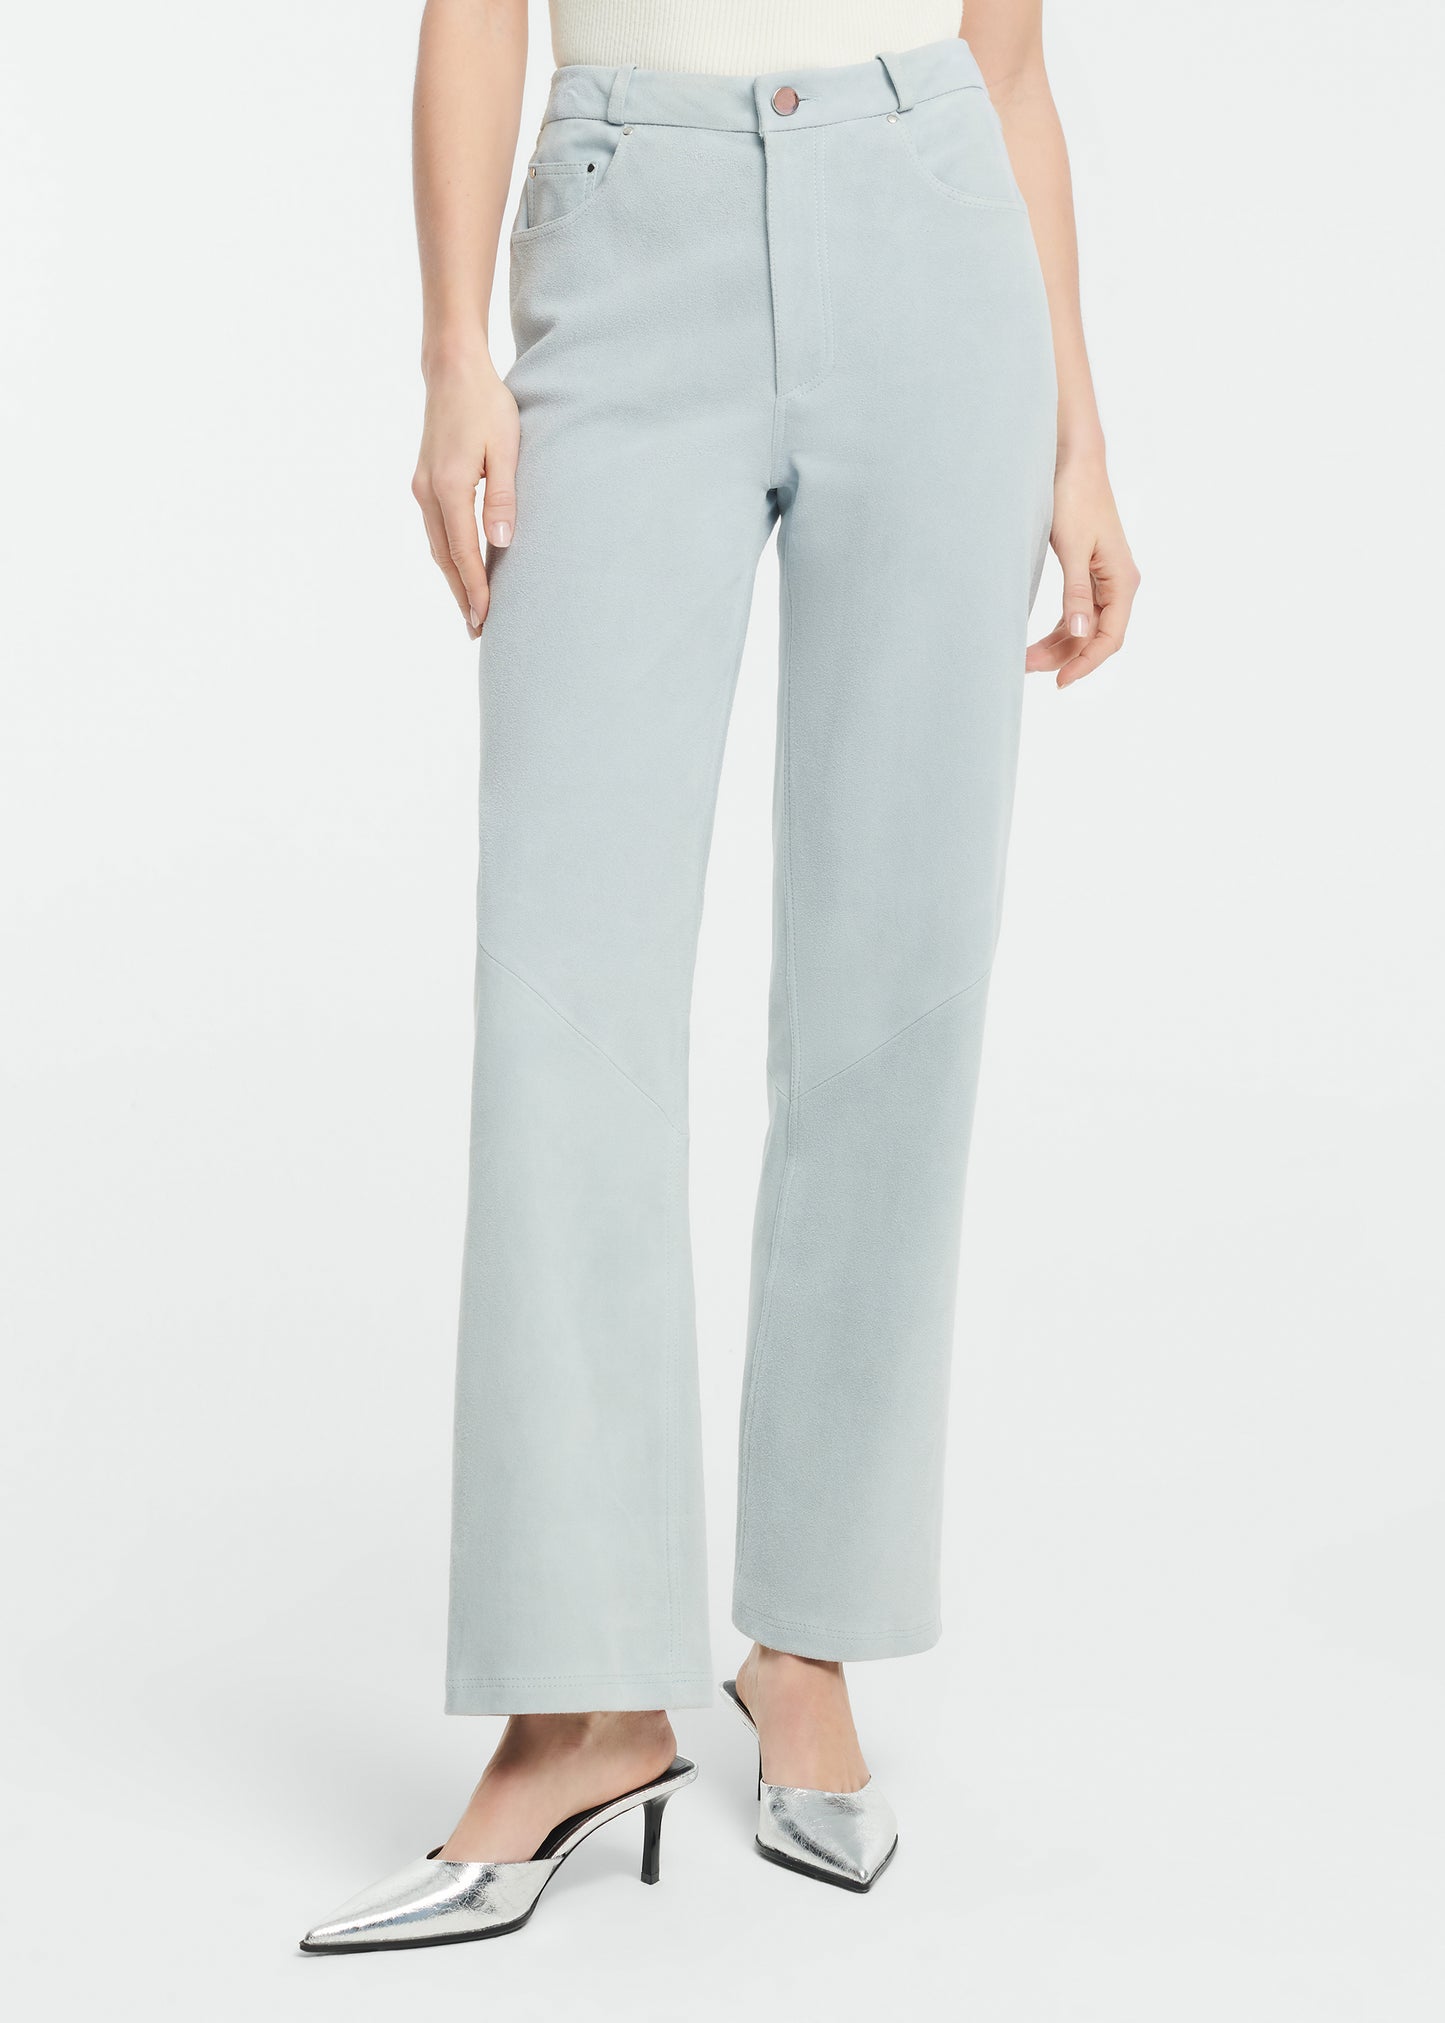 DONA Suede Stretch Trousers